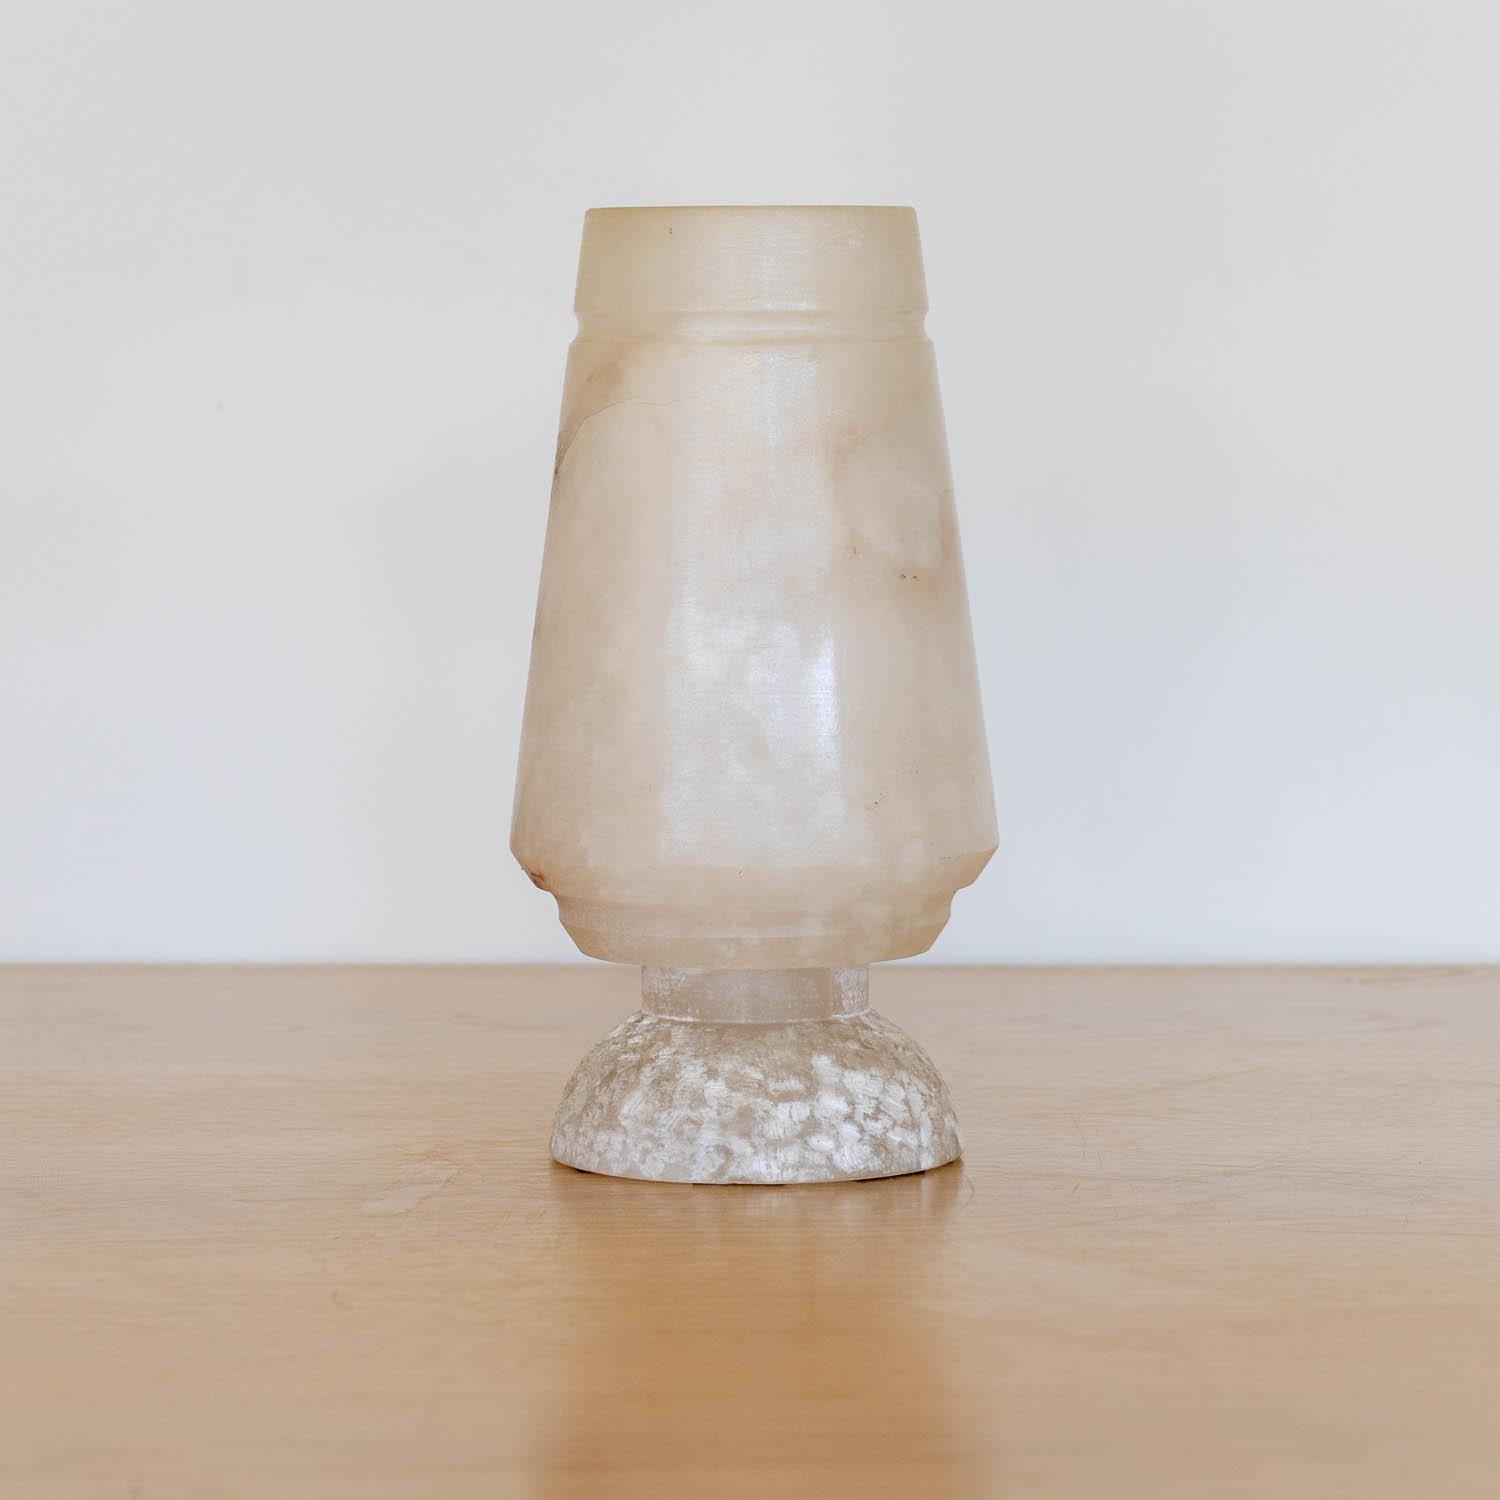 Beautiful alabaster table lamp from France, 1940's. Carved from a single piece of stone a tapered shade and etched dome base. Alabaster shows stunning veins and coloring. Vintage piece shows signs of age with some scuffs.  Newly re-wired. Takes one